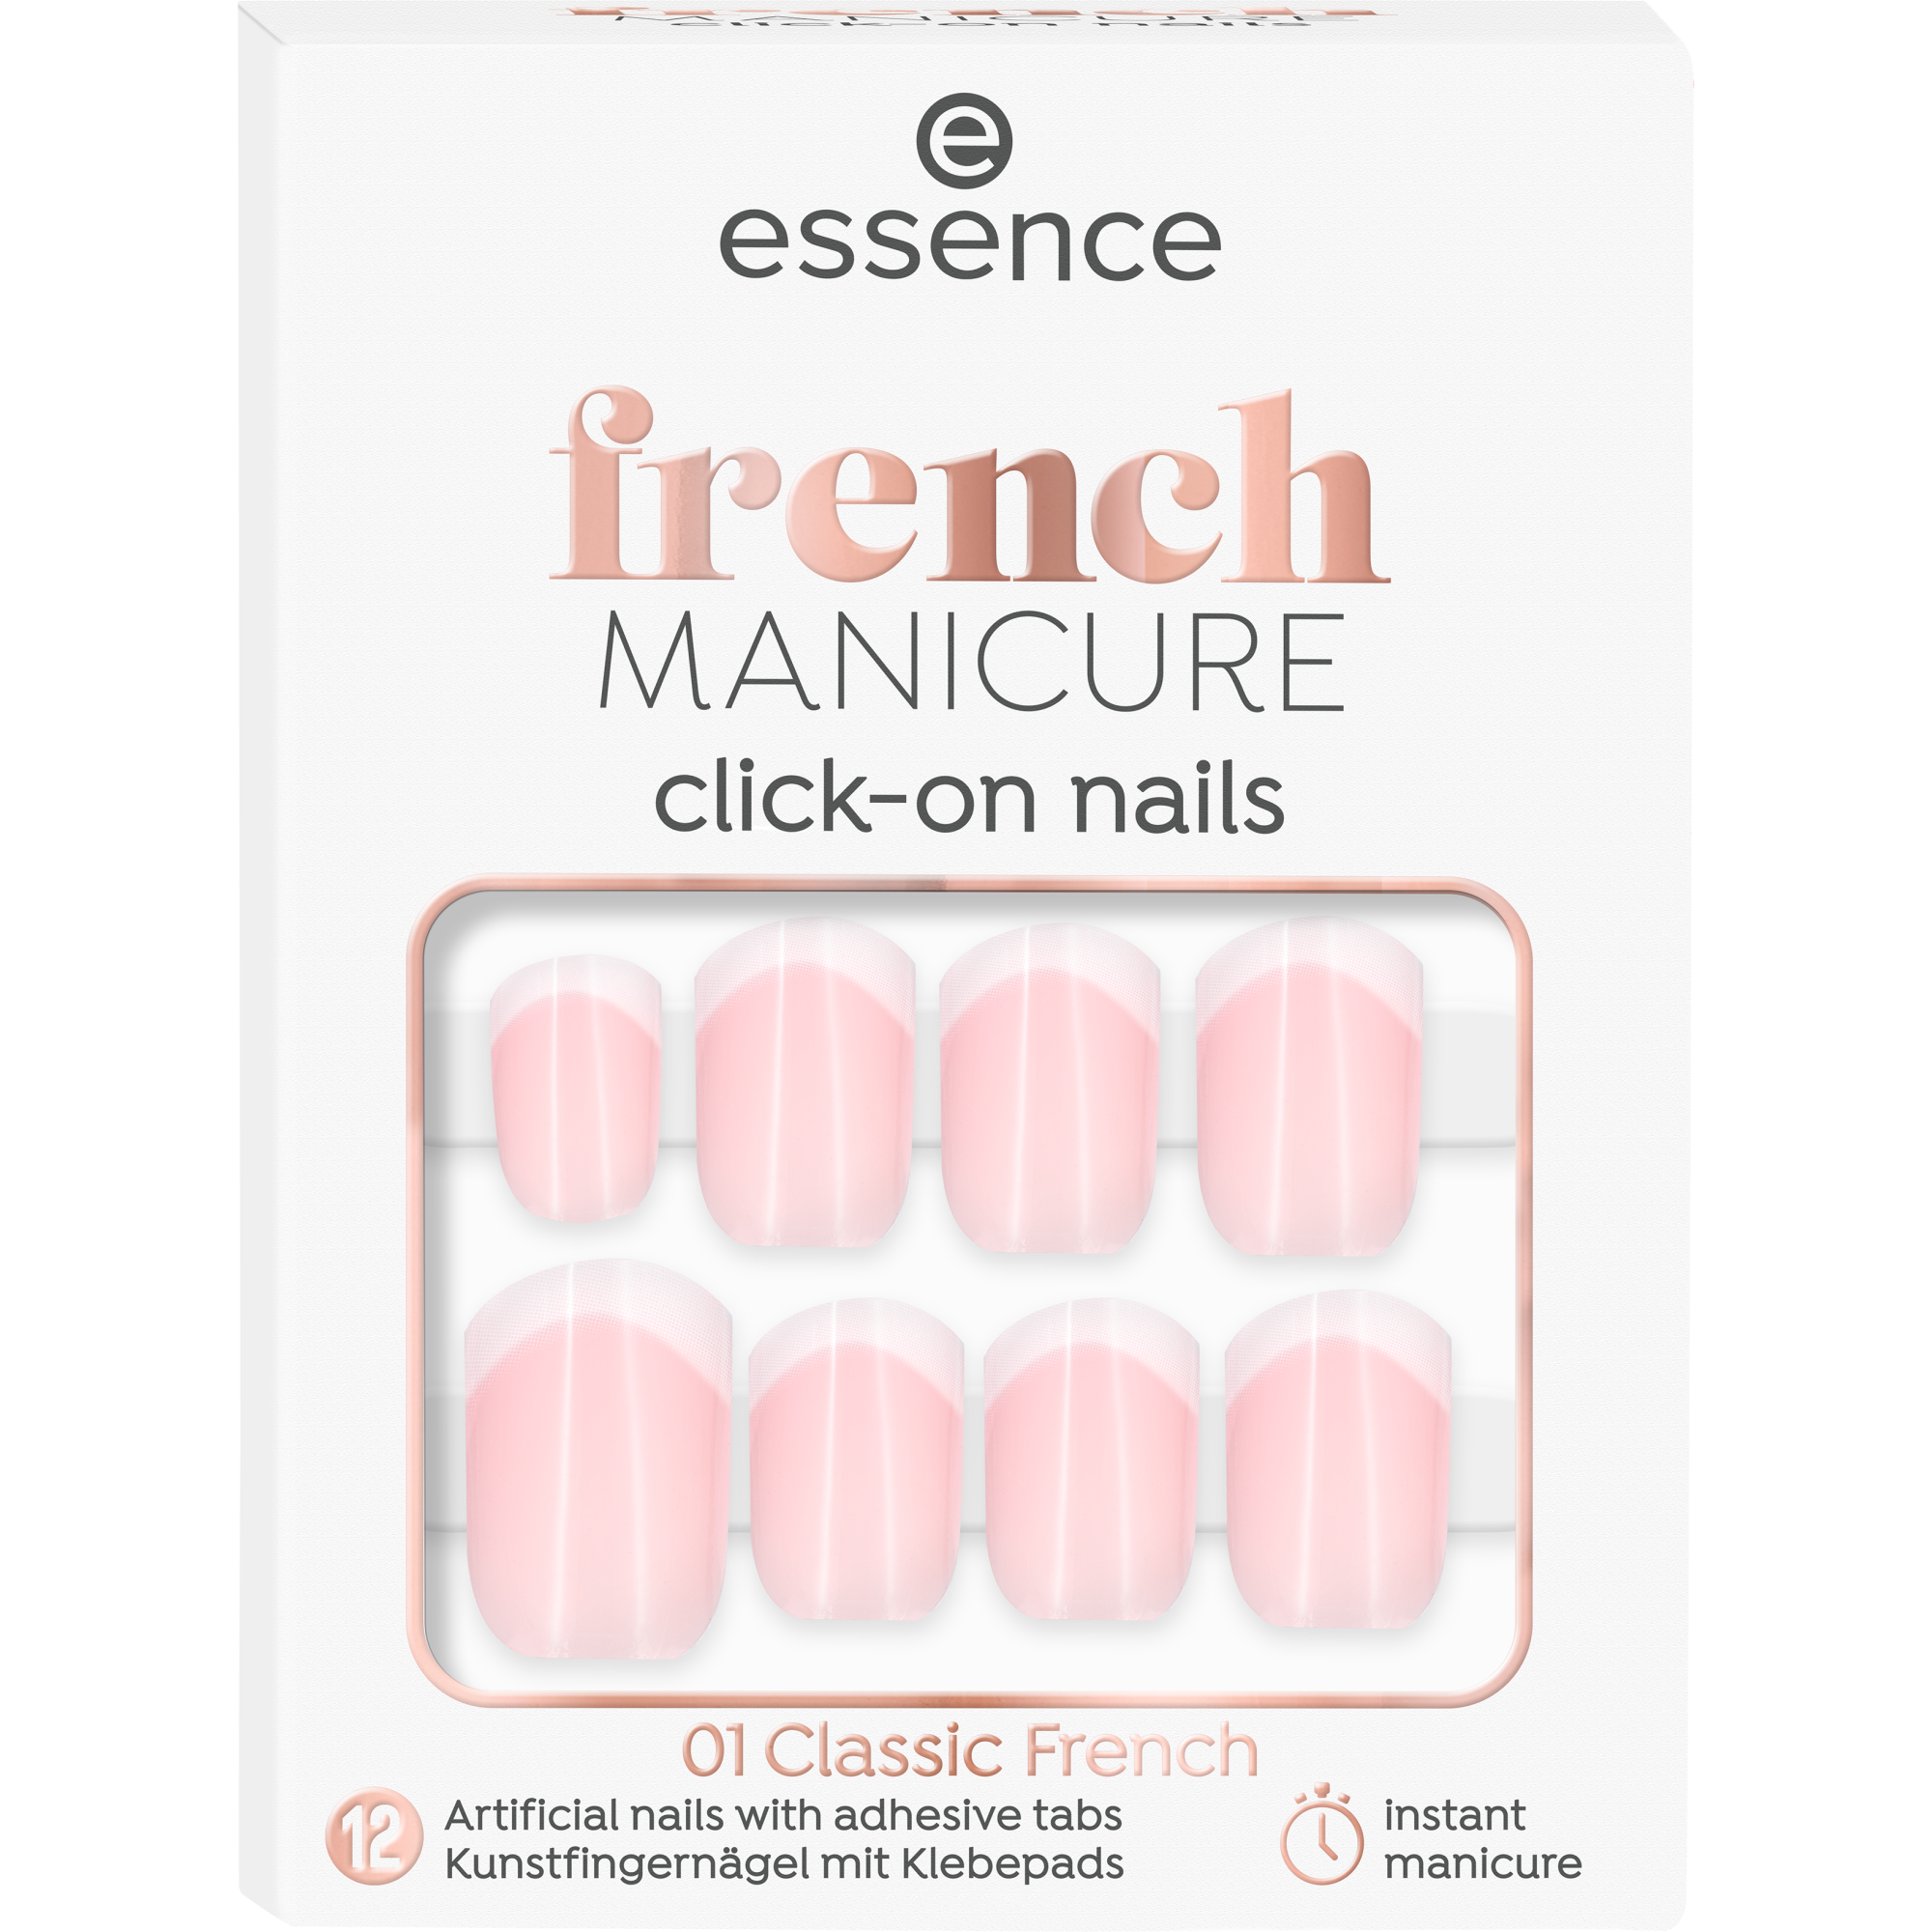 french MANICURE click-on nails faux ongles autocollants